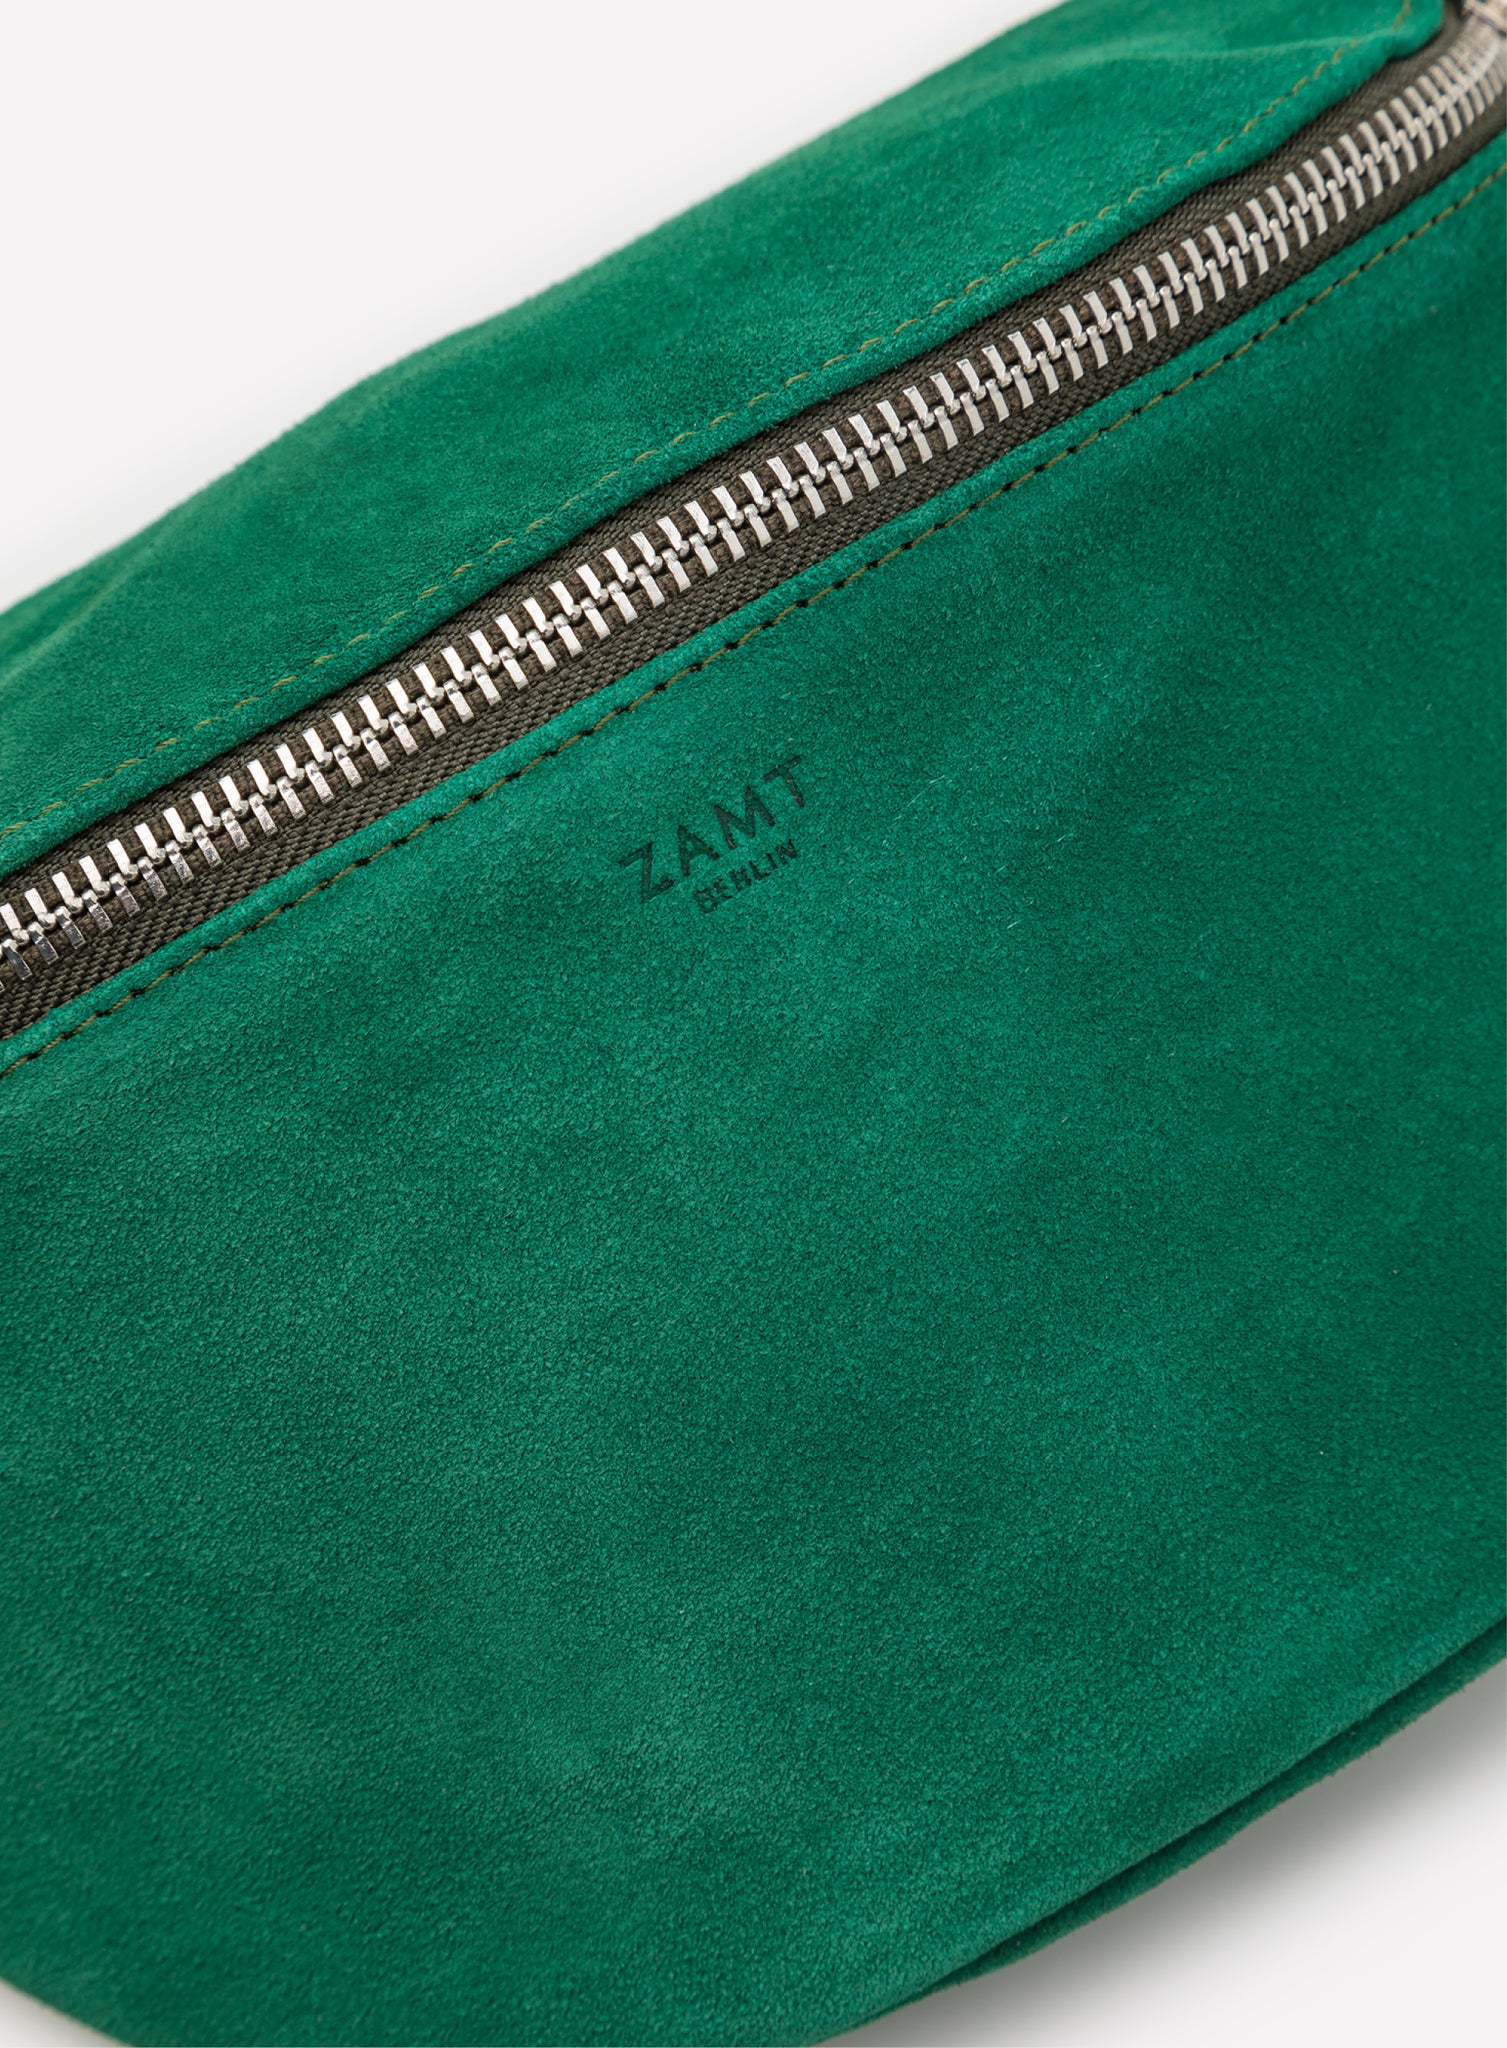 HIP_BAG_CAN_Suede_Green_Designed_in_Berlin_Made_to_last_Handmade_in_Poland.